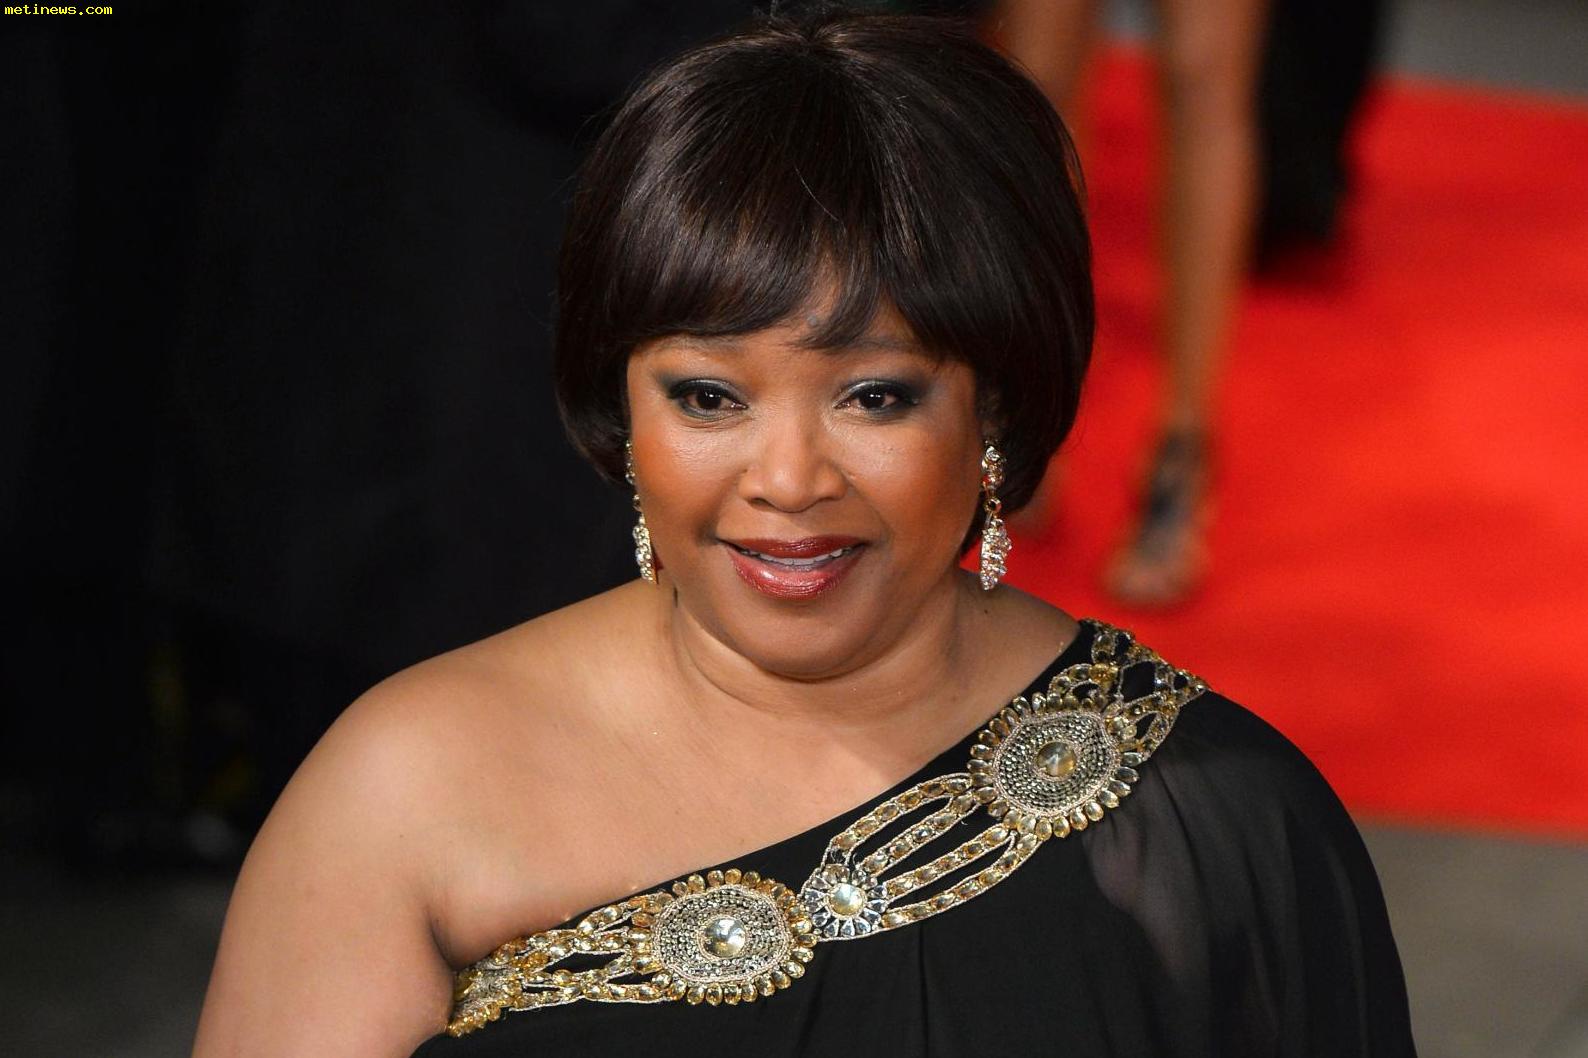 Zindzi Mandela’s son reveals she tested positive for COVID-19 before her death